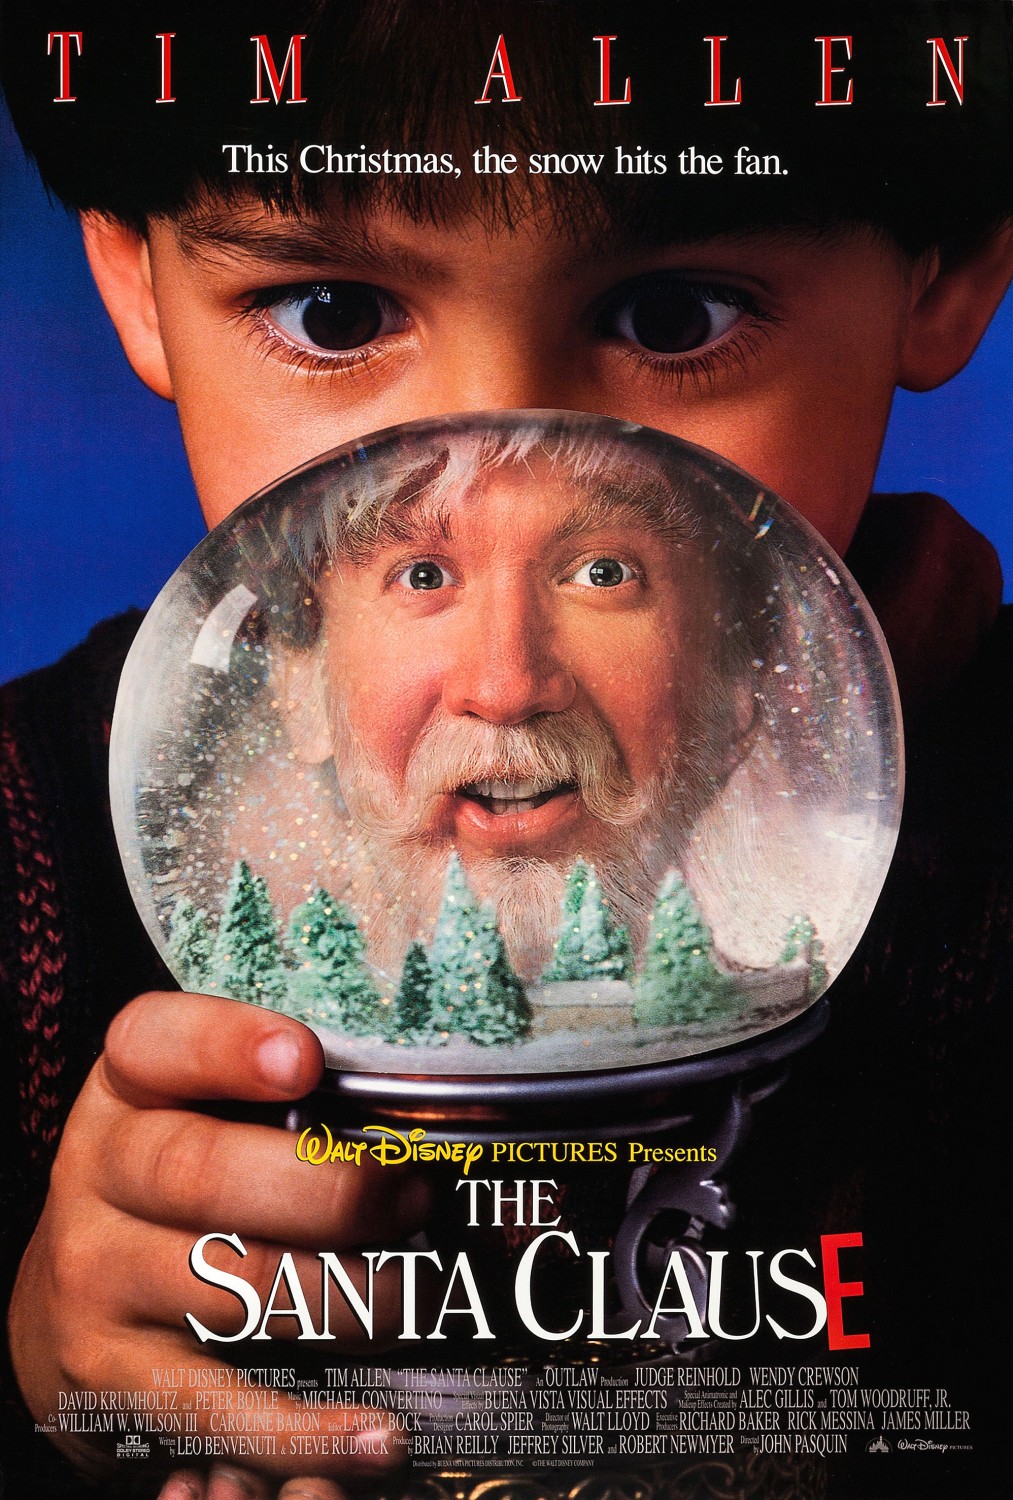 The Santa Clause returns to theaters